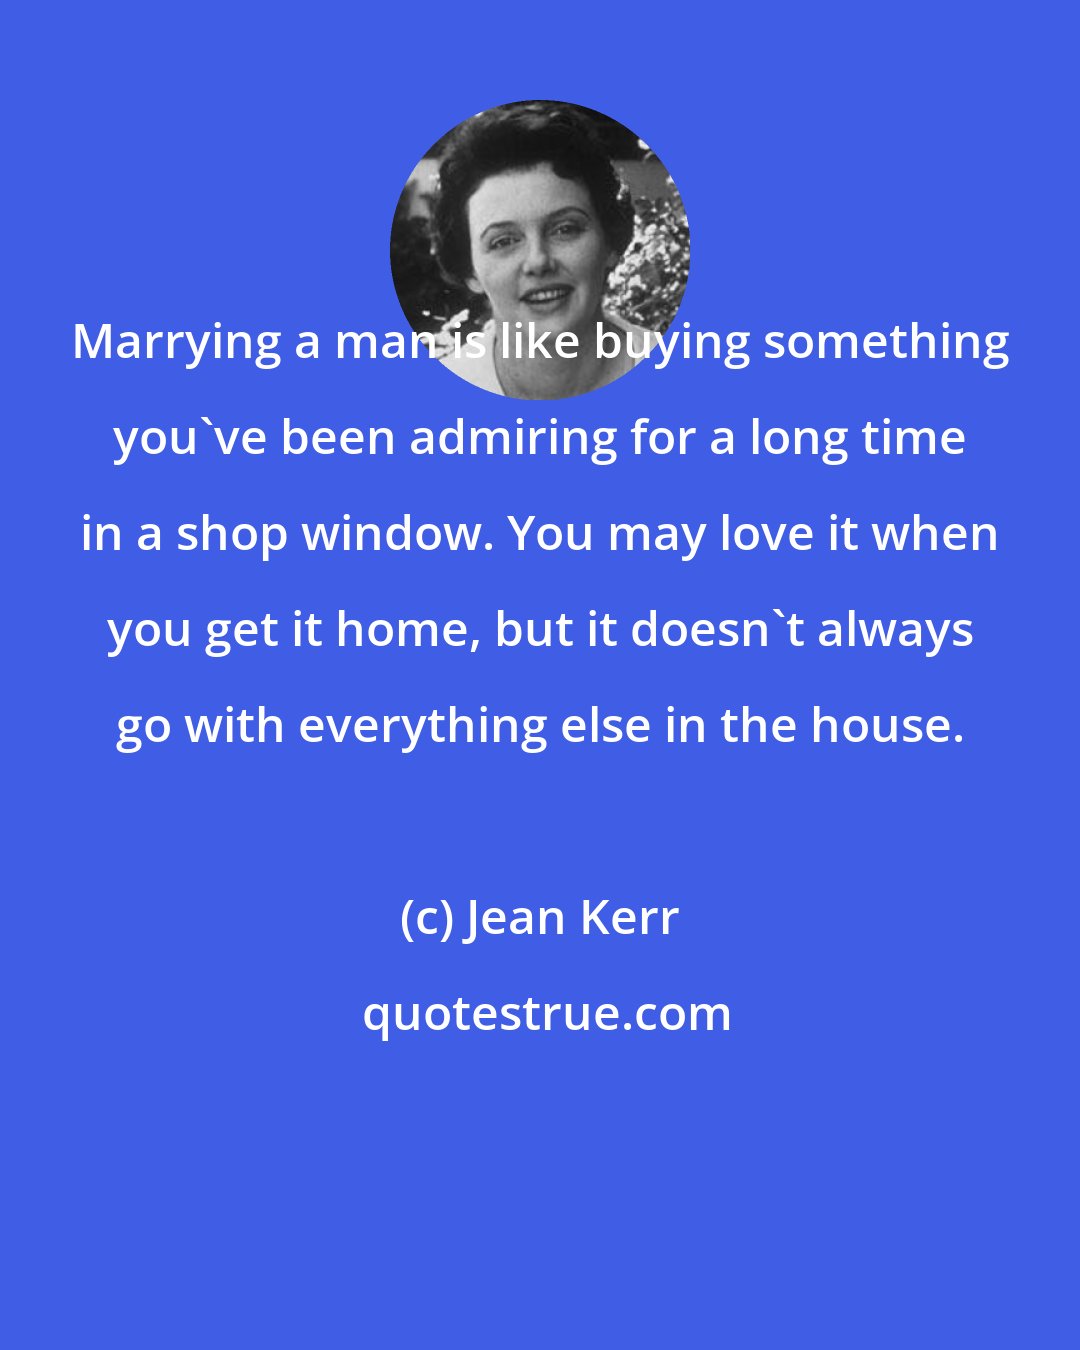 Jean Kerr: Marrying a man is like buying something you've been admiring for a long time in a shop window. You may love it when you get it home, but it doesn't always go with everything else in the house.